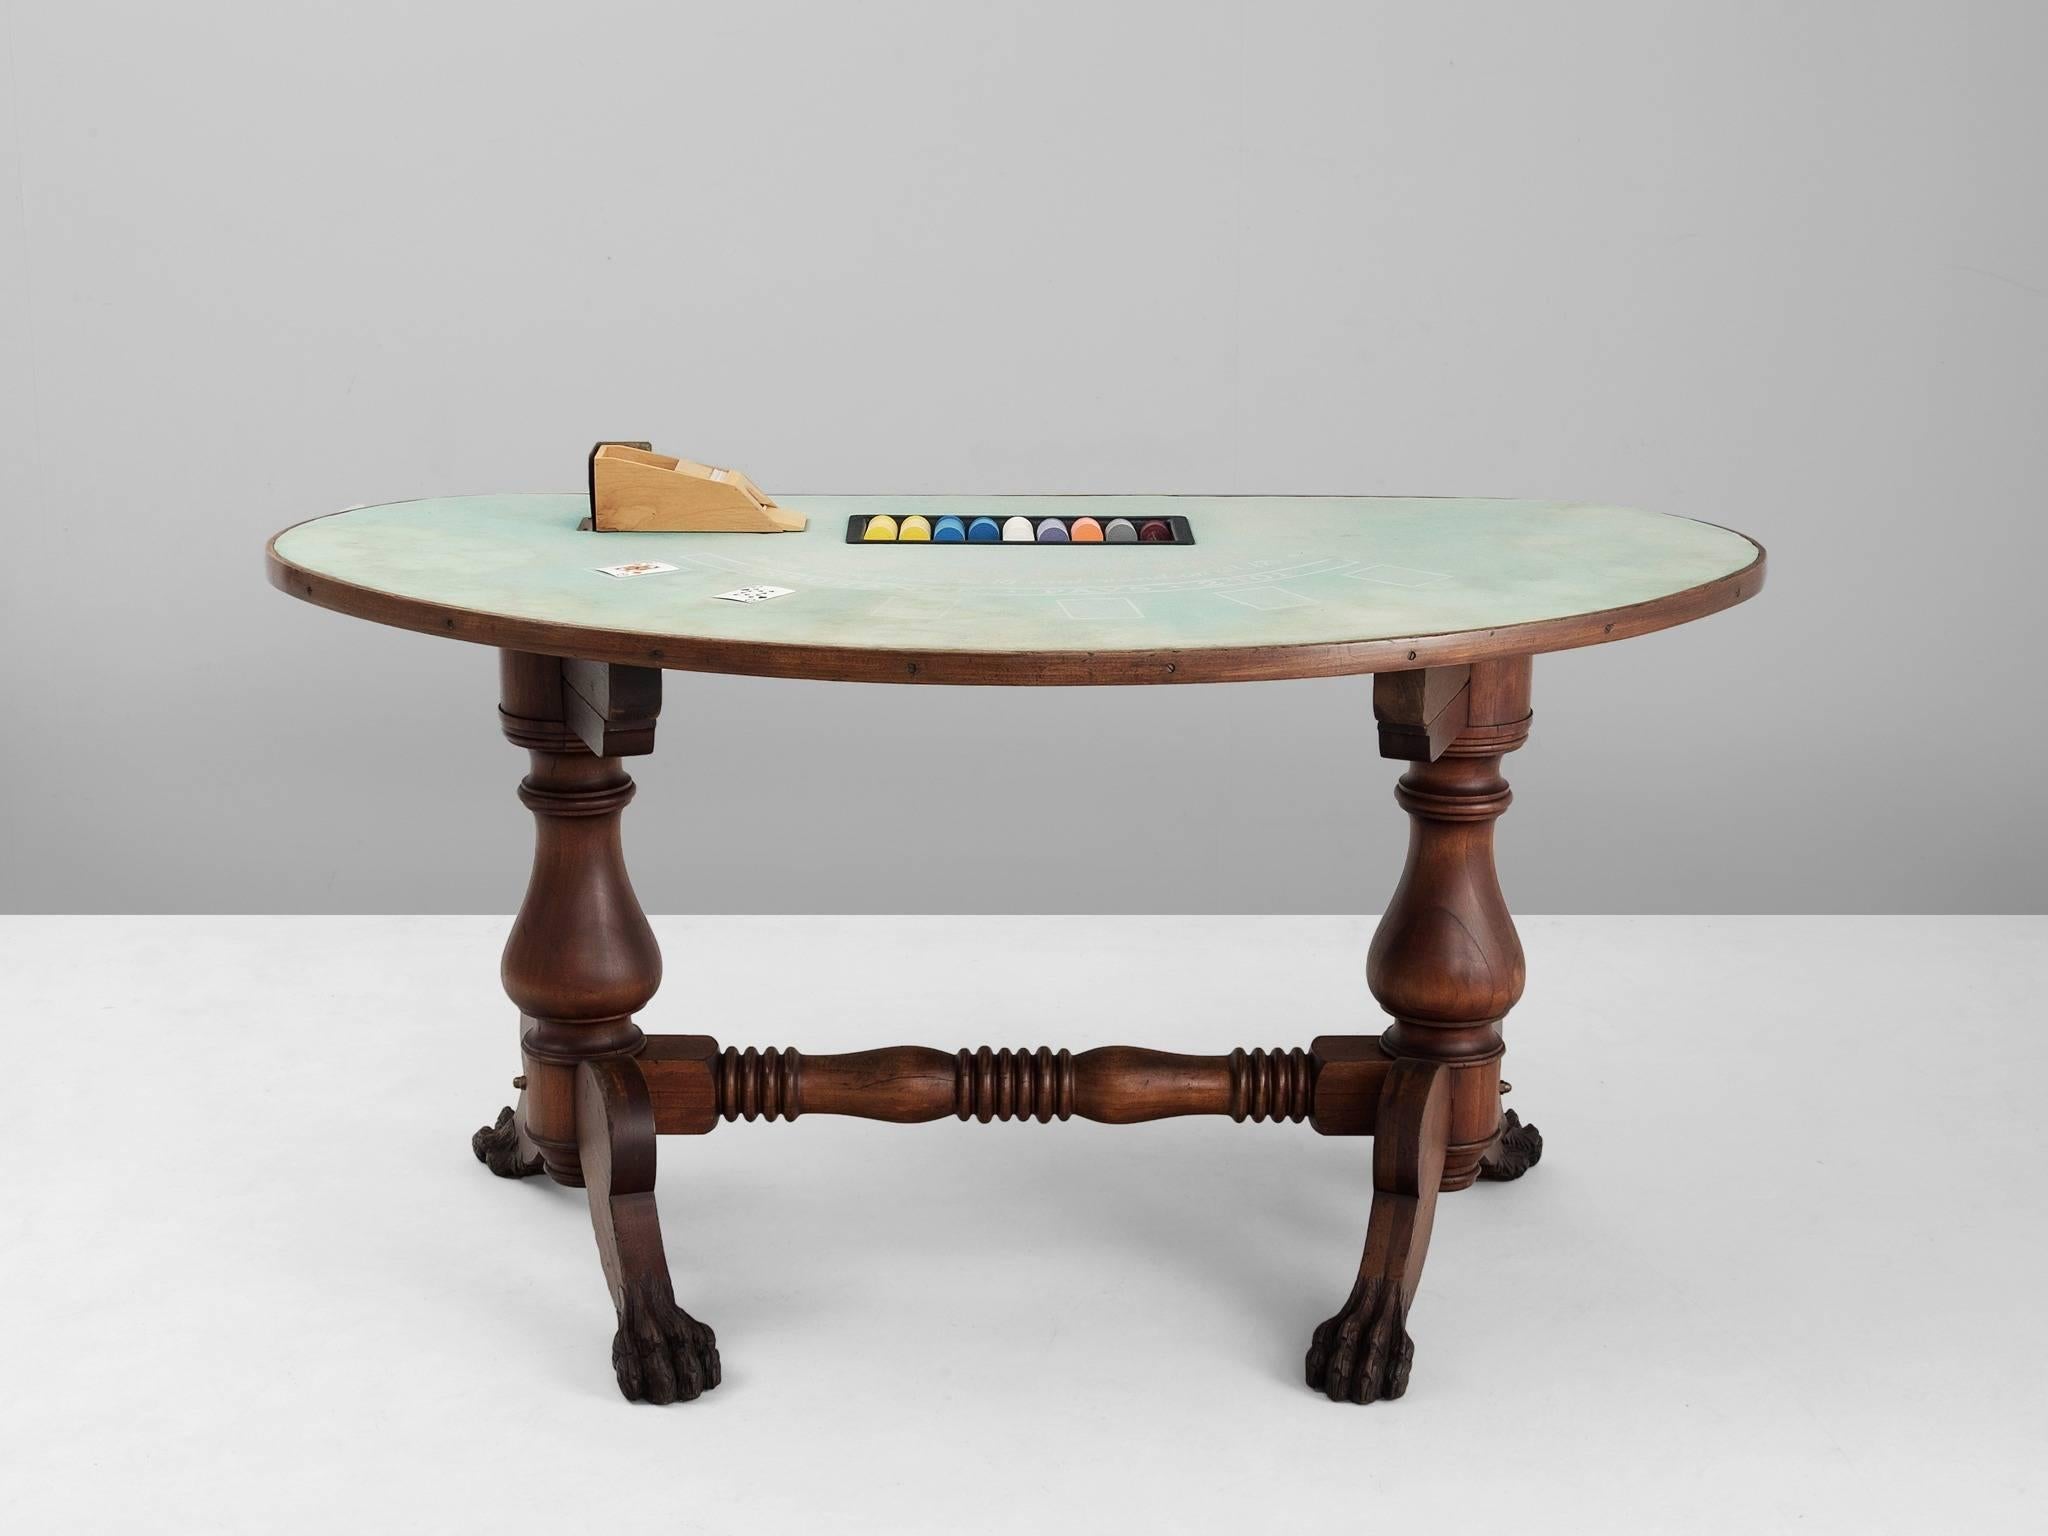 Game table, in mahogany, brass and fabric, United States, 1940s.

A beautiful antique American mahogany blackjack table in its original condition. Complete with original cardholder. The wooden frame is highly detailed and shows great